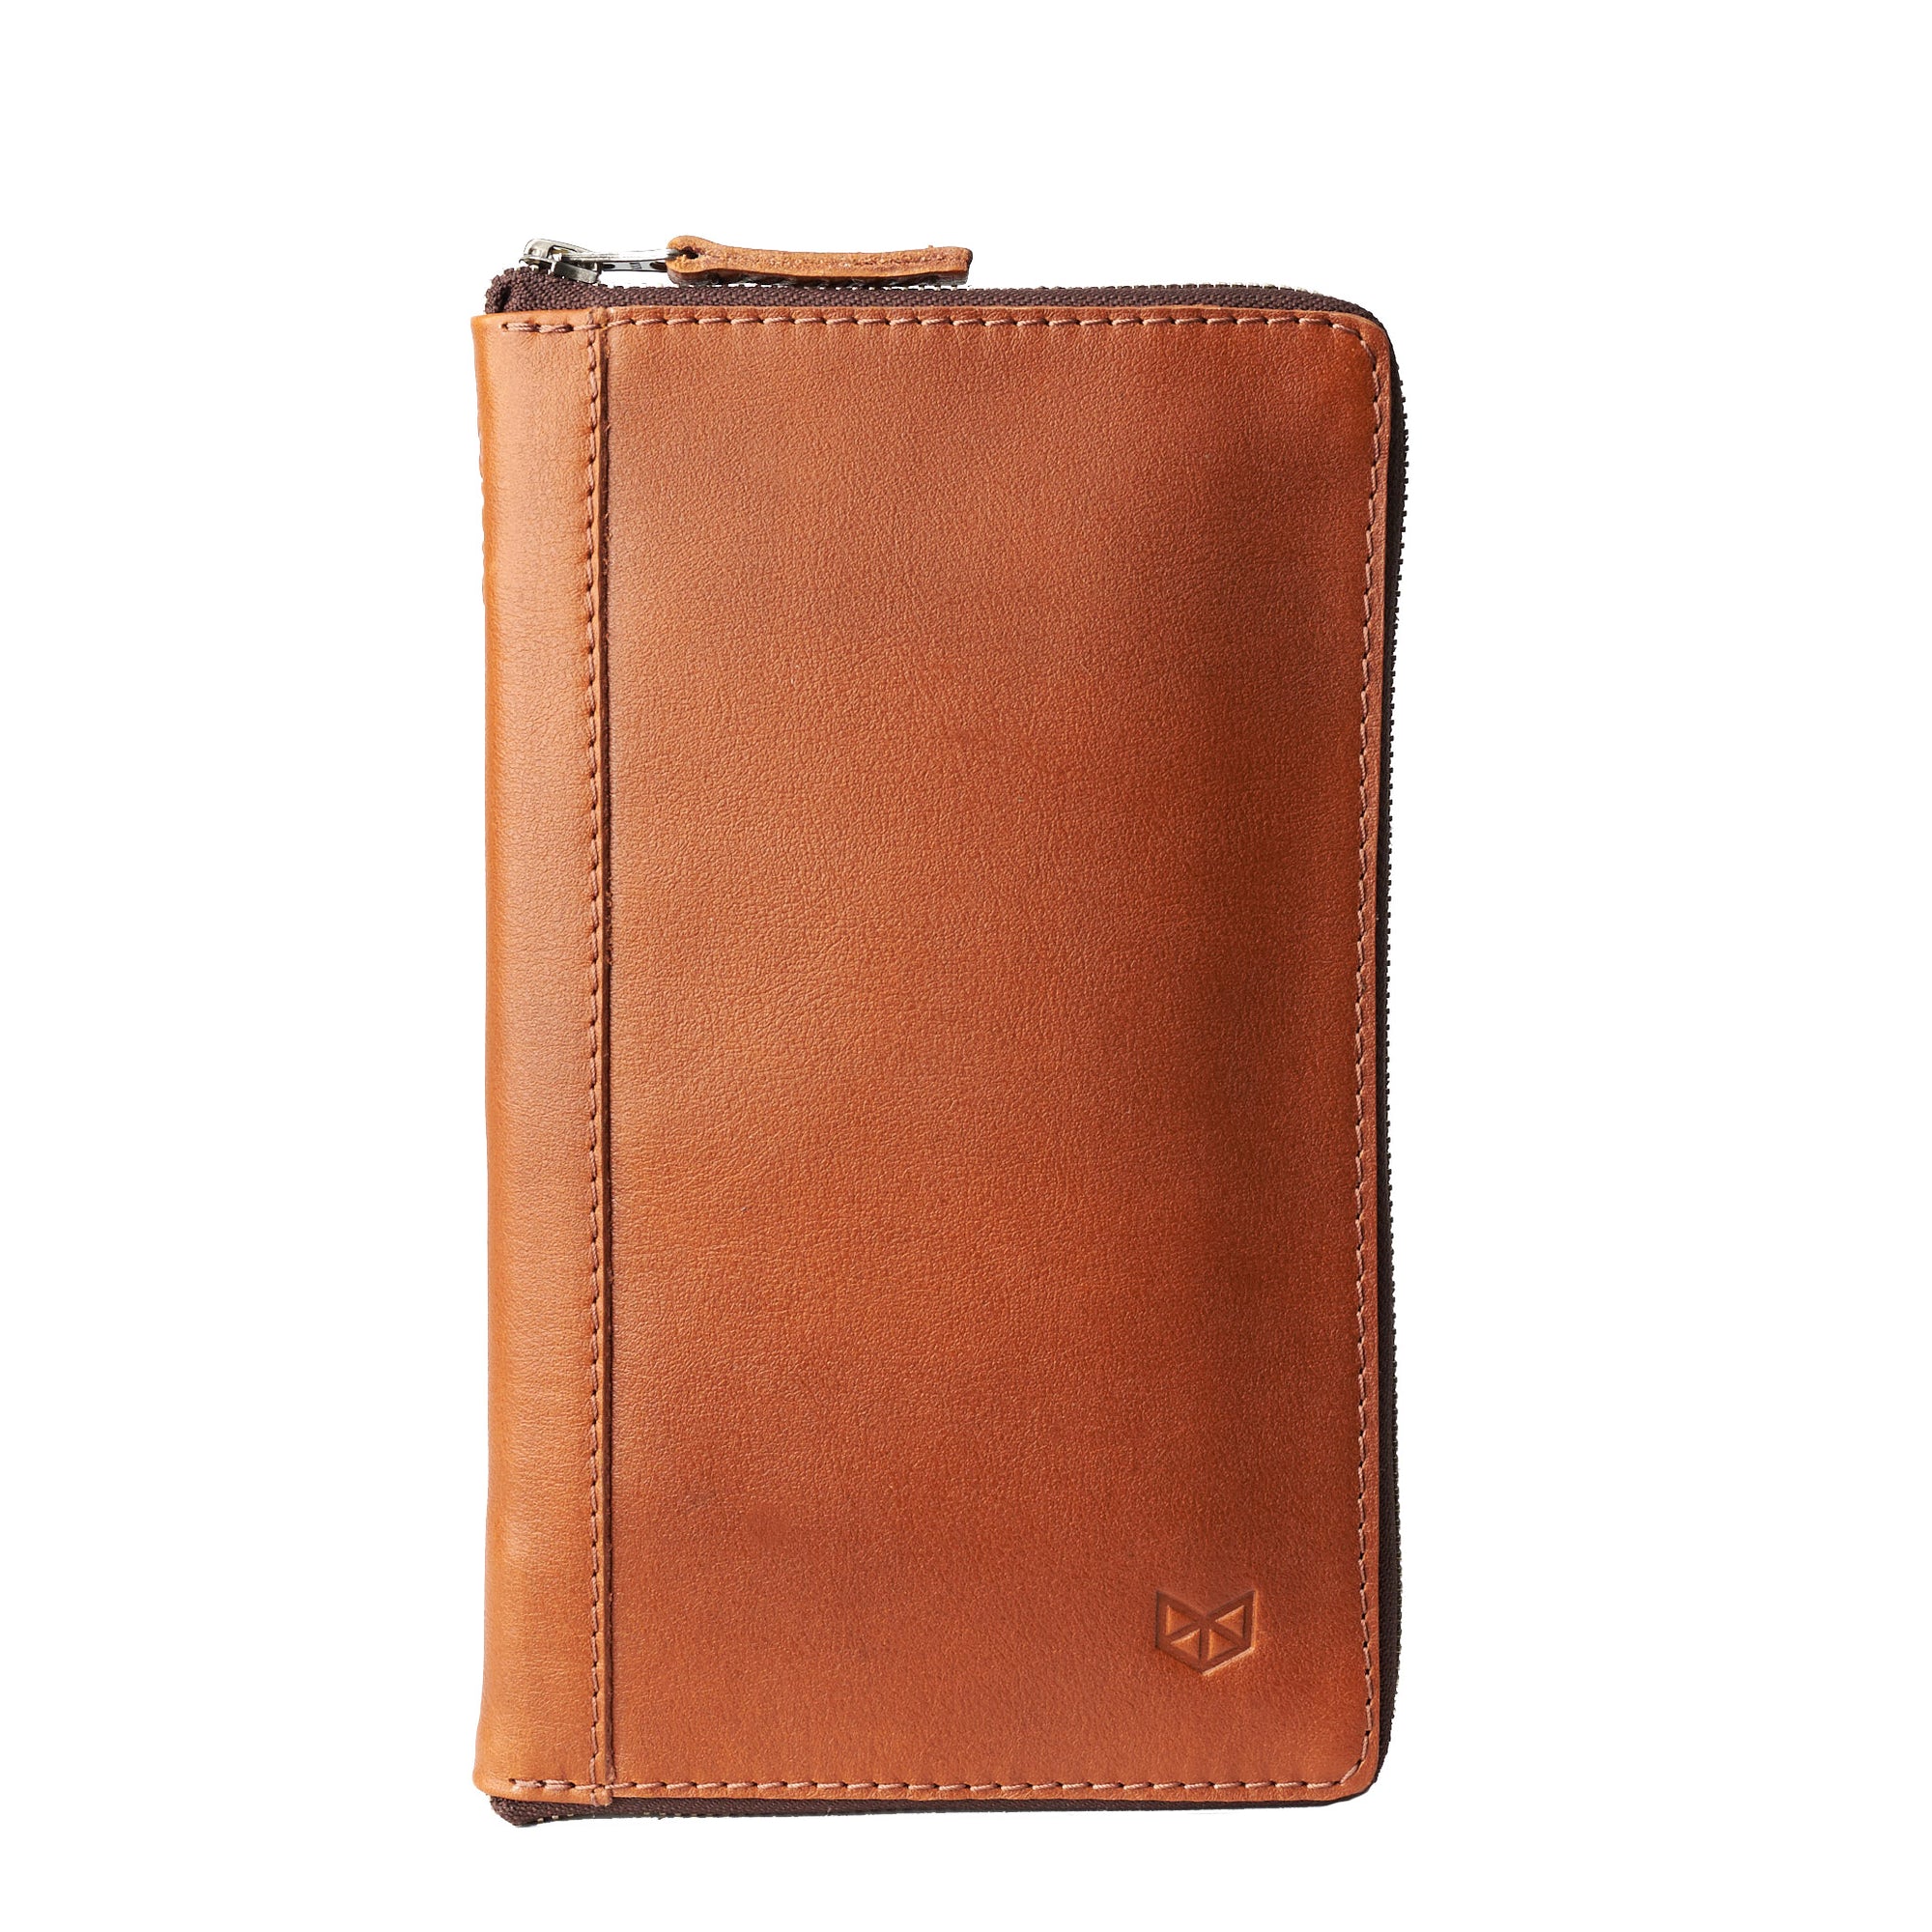 Front tan leather passport wallet. Perfect for travelers. Gift for men by Capra Leather.